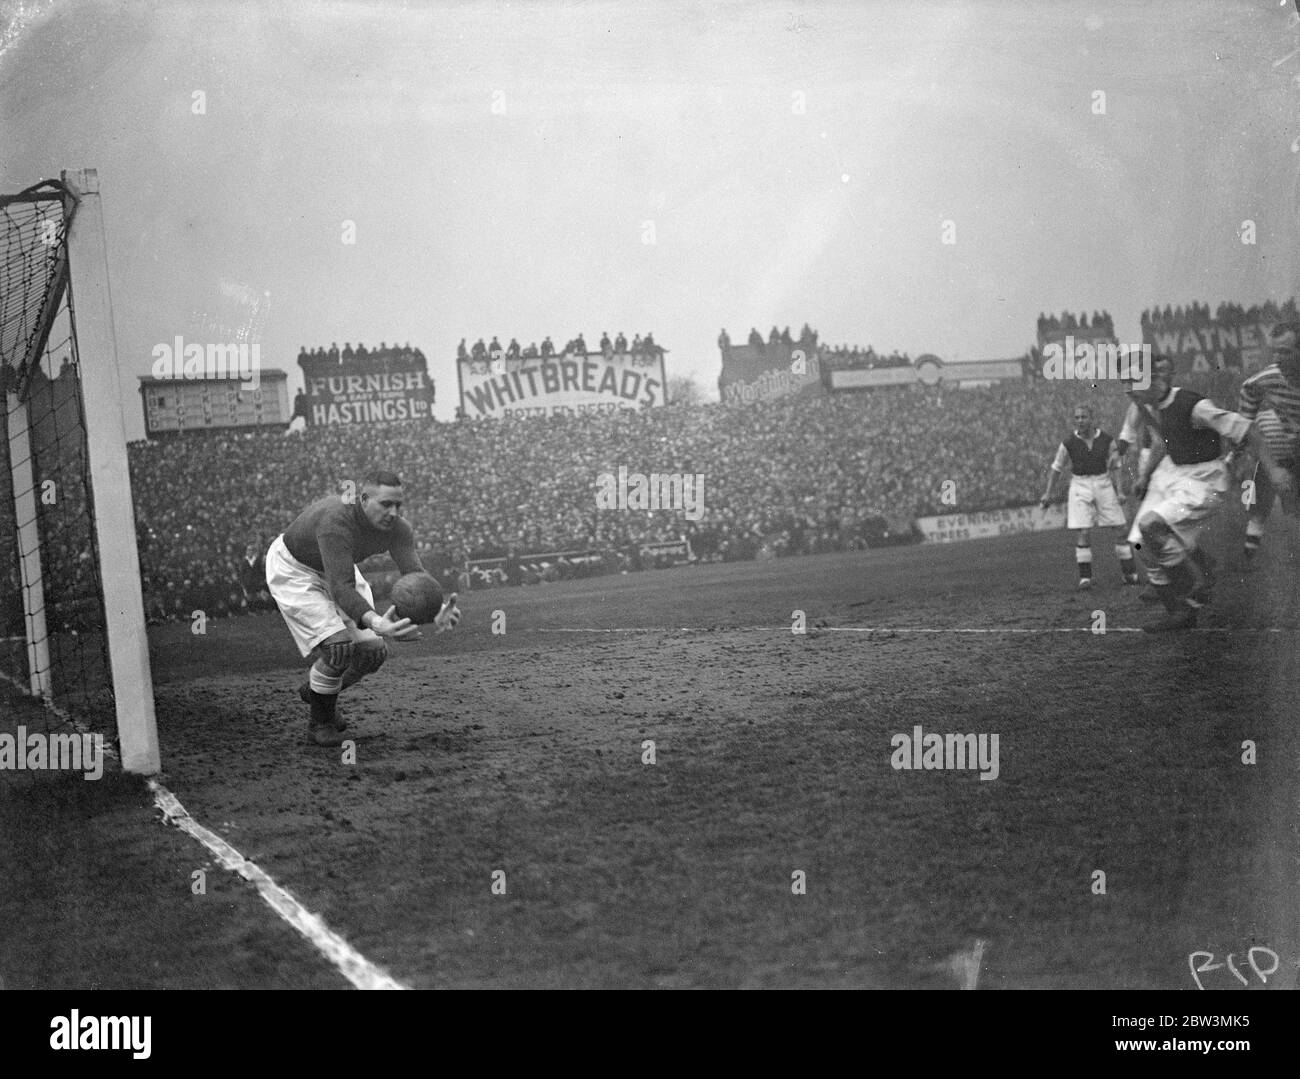 John Kirby in action at Craven cottage . Fulham met Drby County in the sixth round of the F A Cup competition at Craven Cottage , London . Photo shows John Kirby , the Derby goalkeeper saving a shot . 29 February 1936 Stock Photo